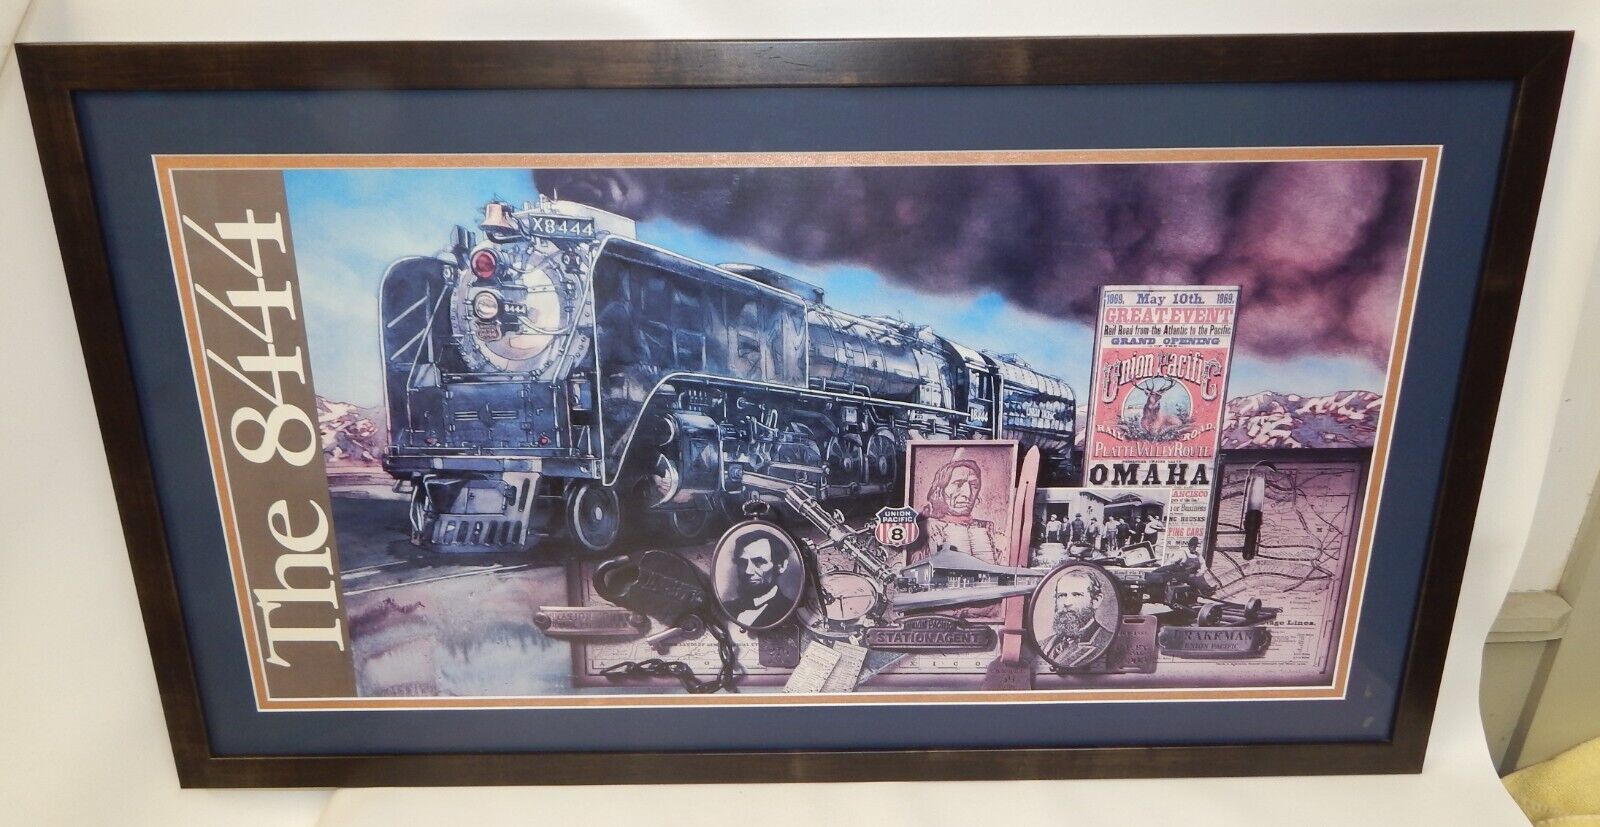 Union Pacific 8444 Locomotive Historic Railroad Poster Print Matted & Framed